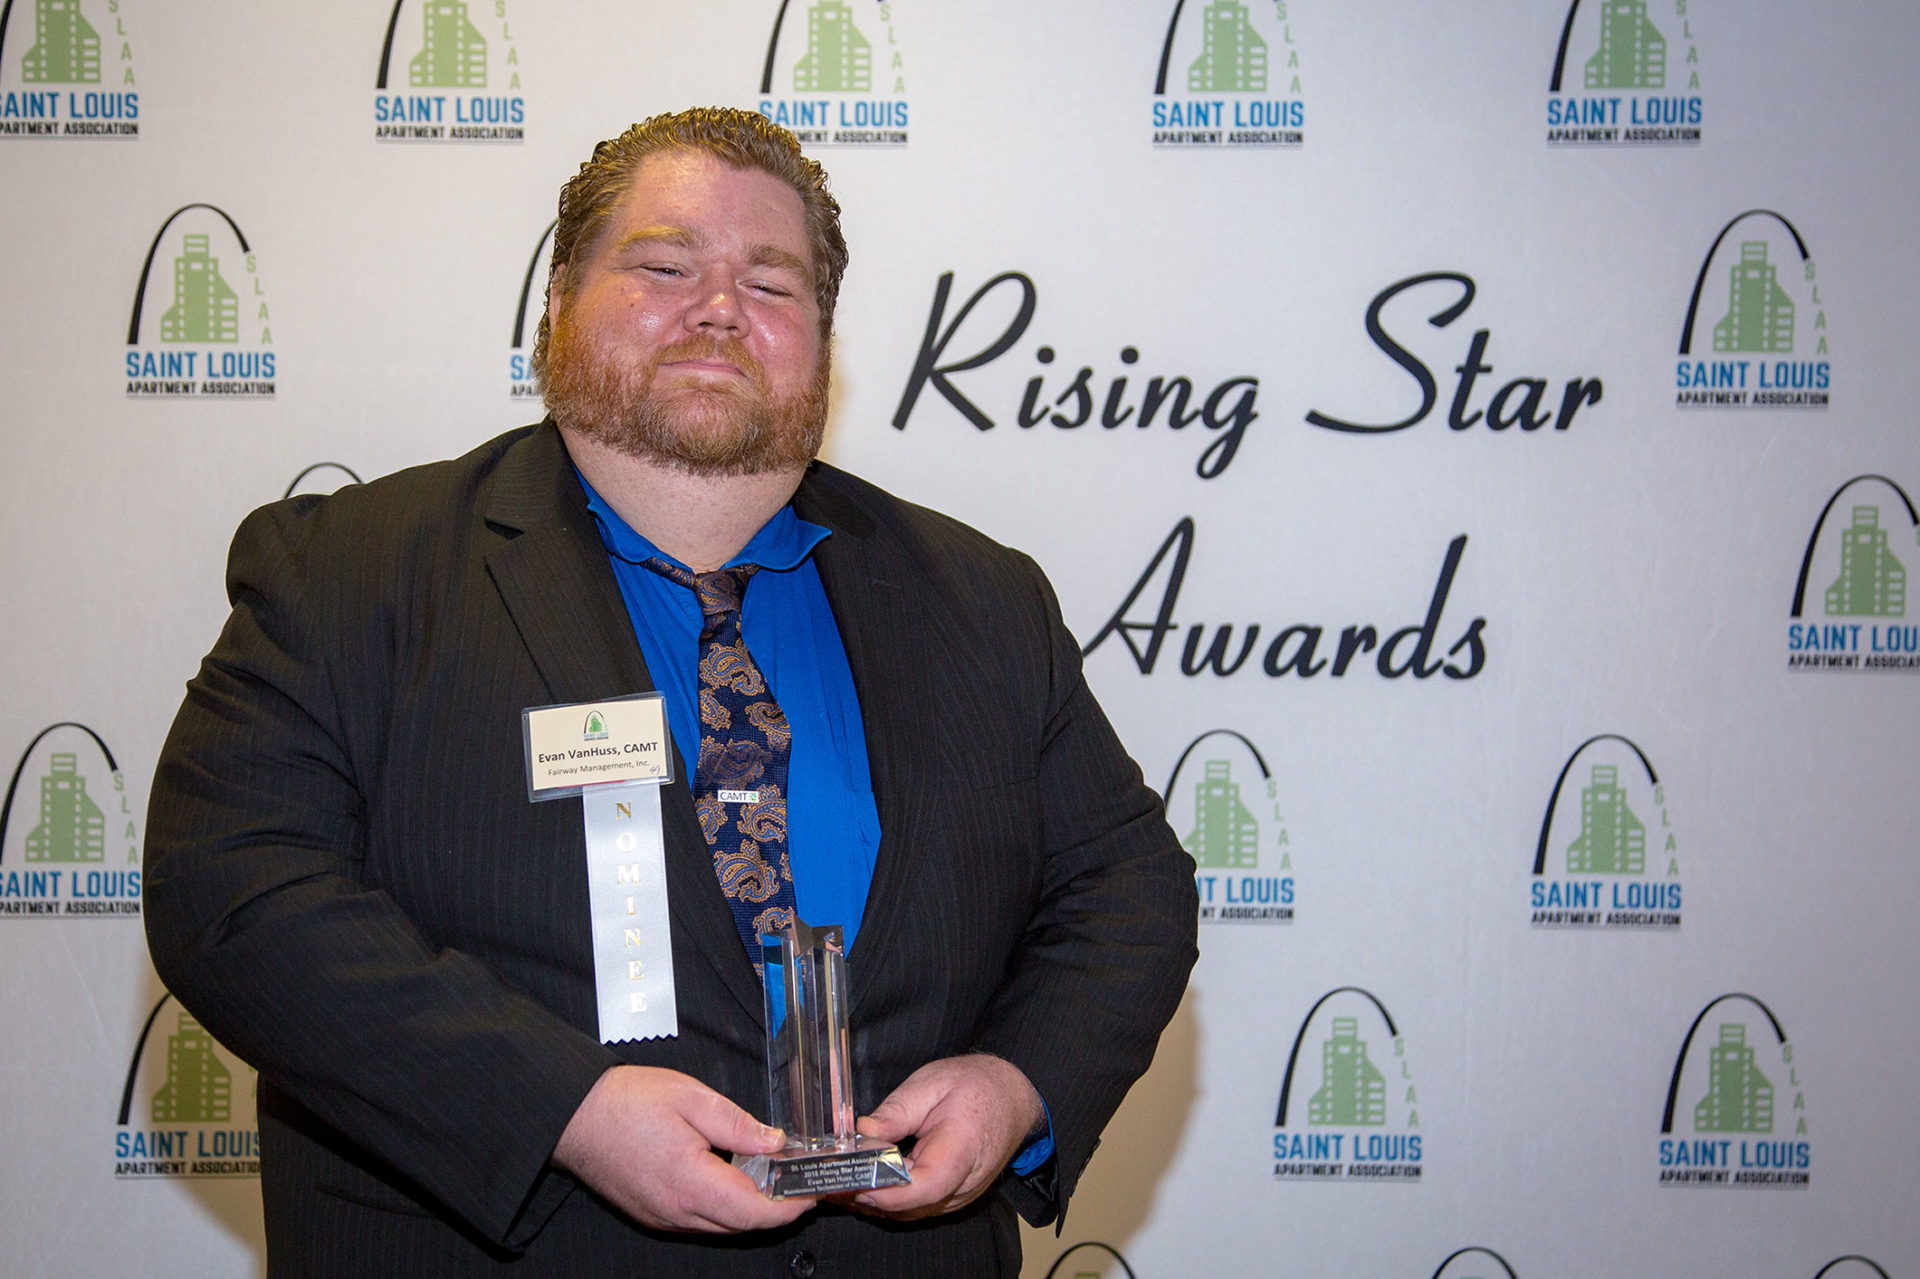 Evan Van Huss was honored for his strong work and dedication at the SLAA Rising Star Awards Banquet.